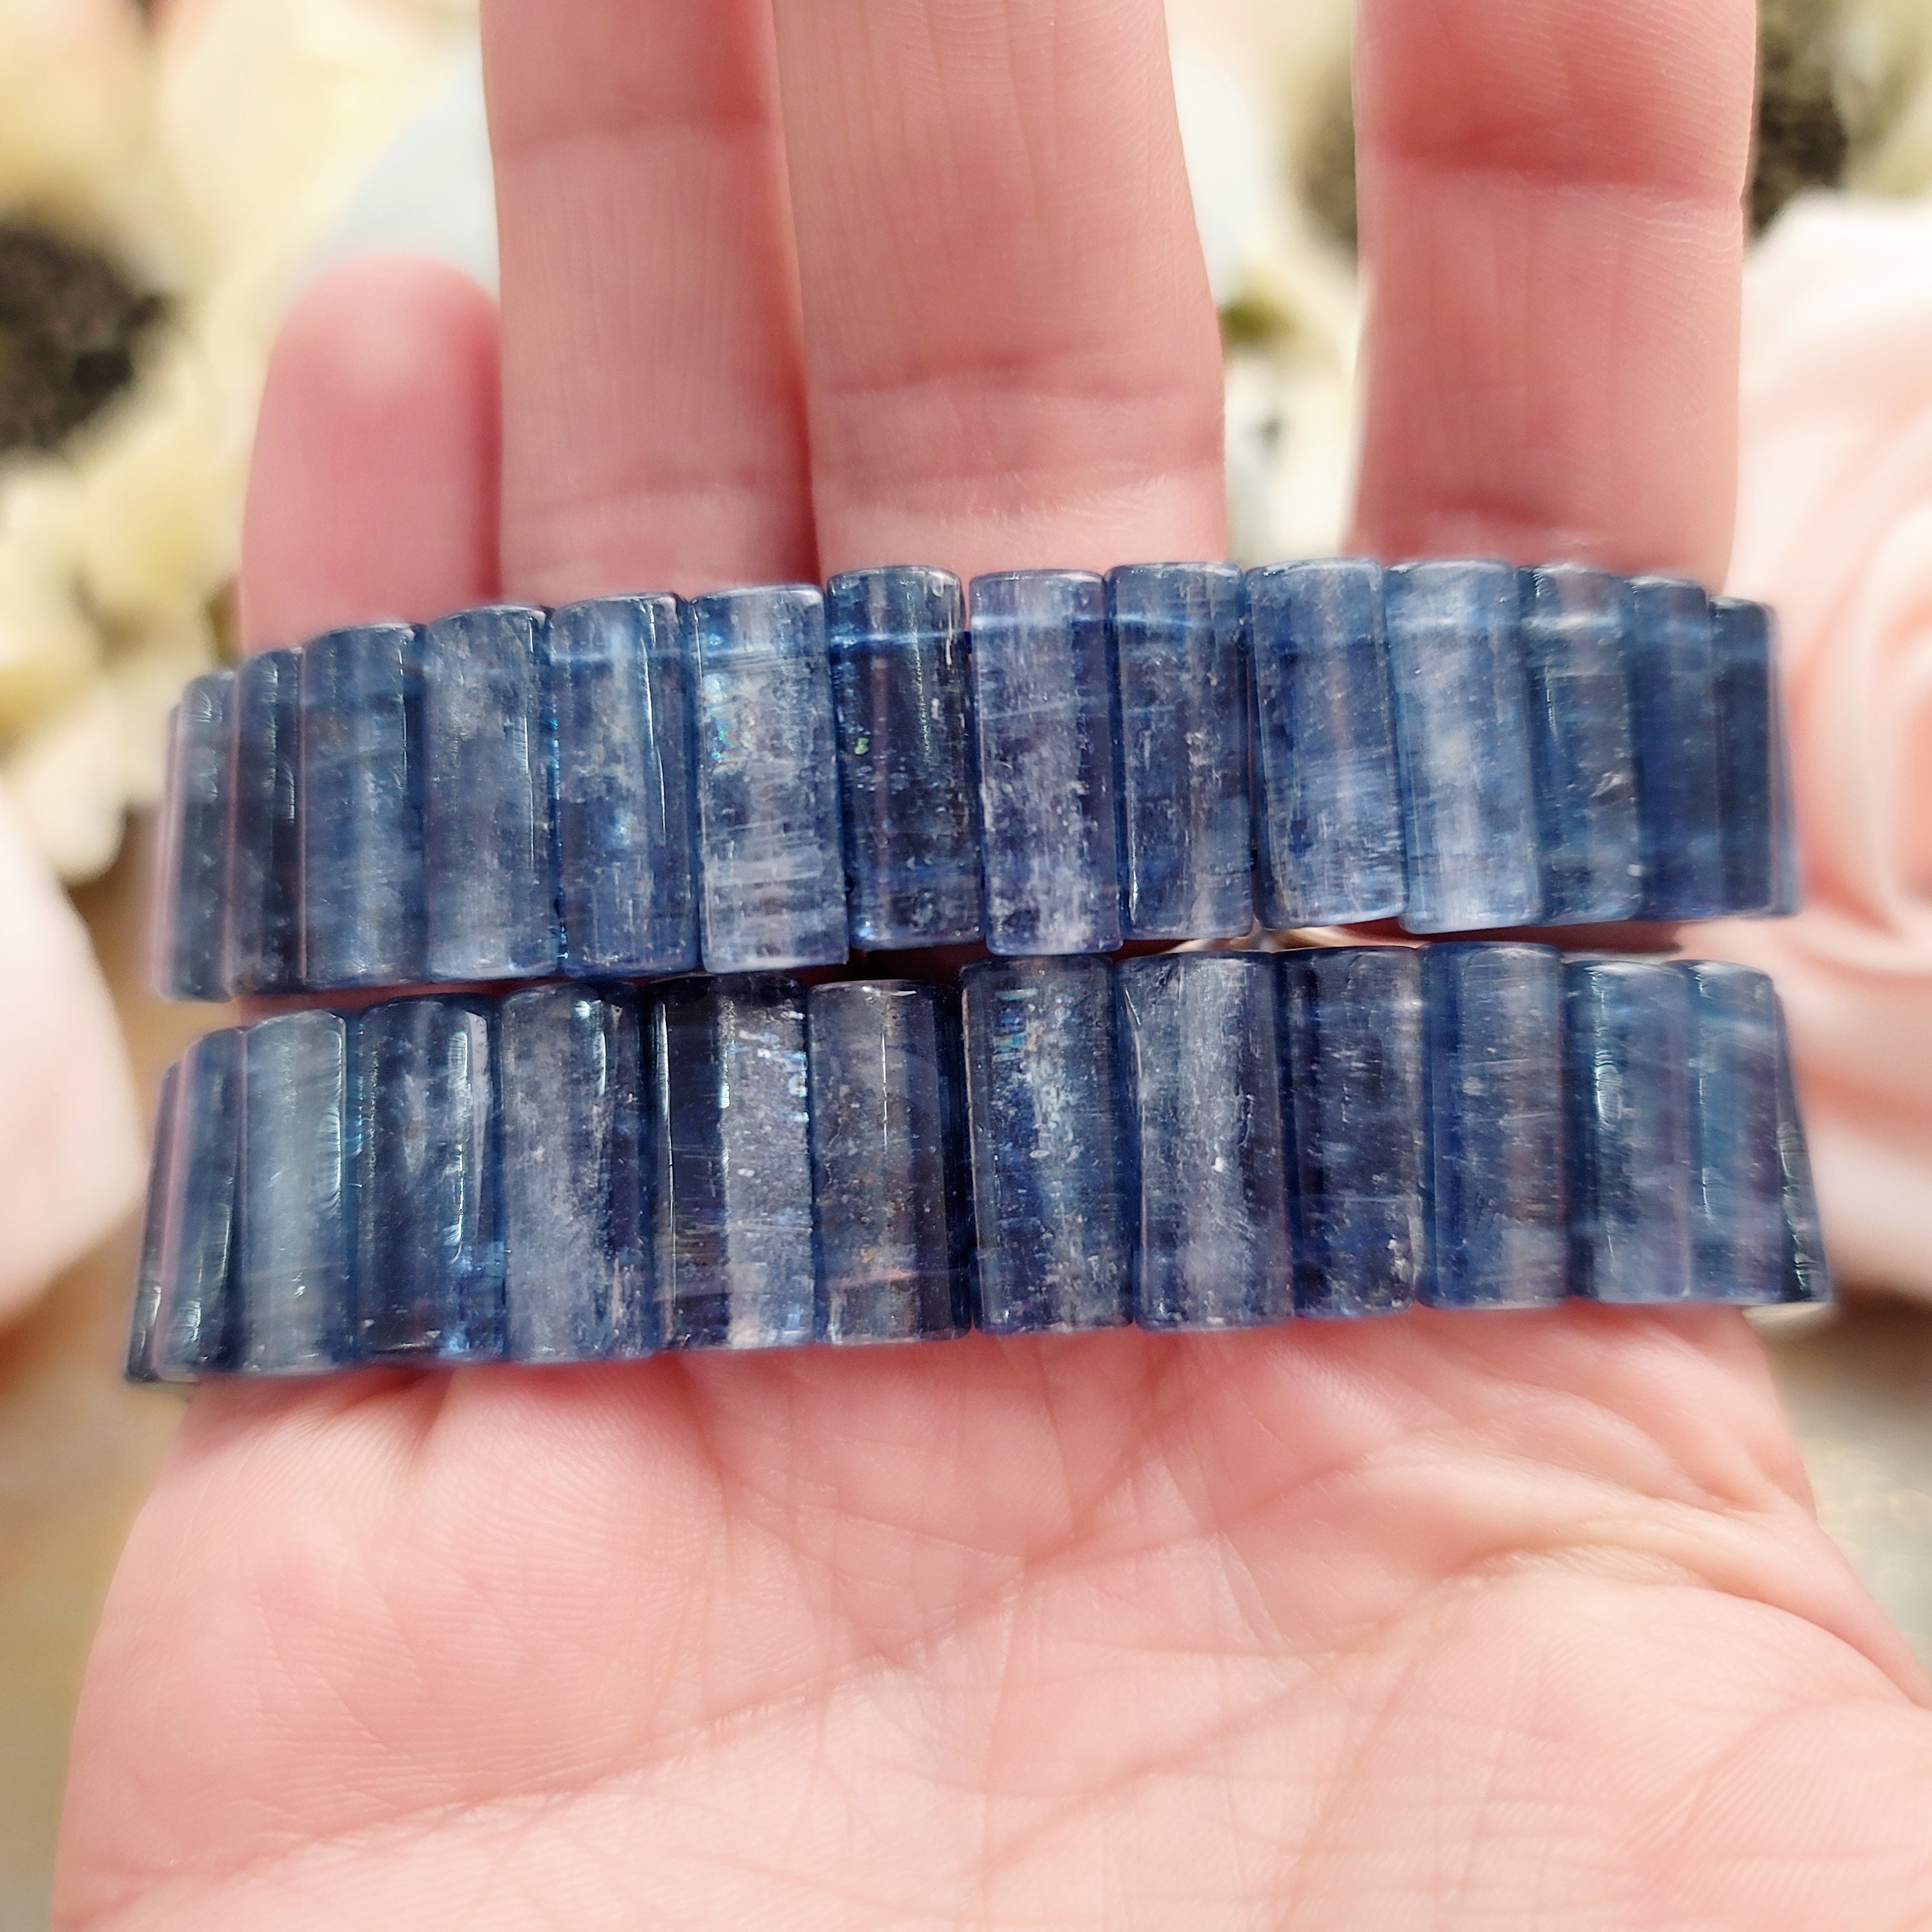 Kyanite Stretchy Bangle Bracelet for Purifying your Body's Energy Fields